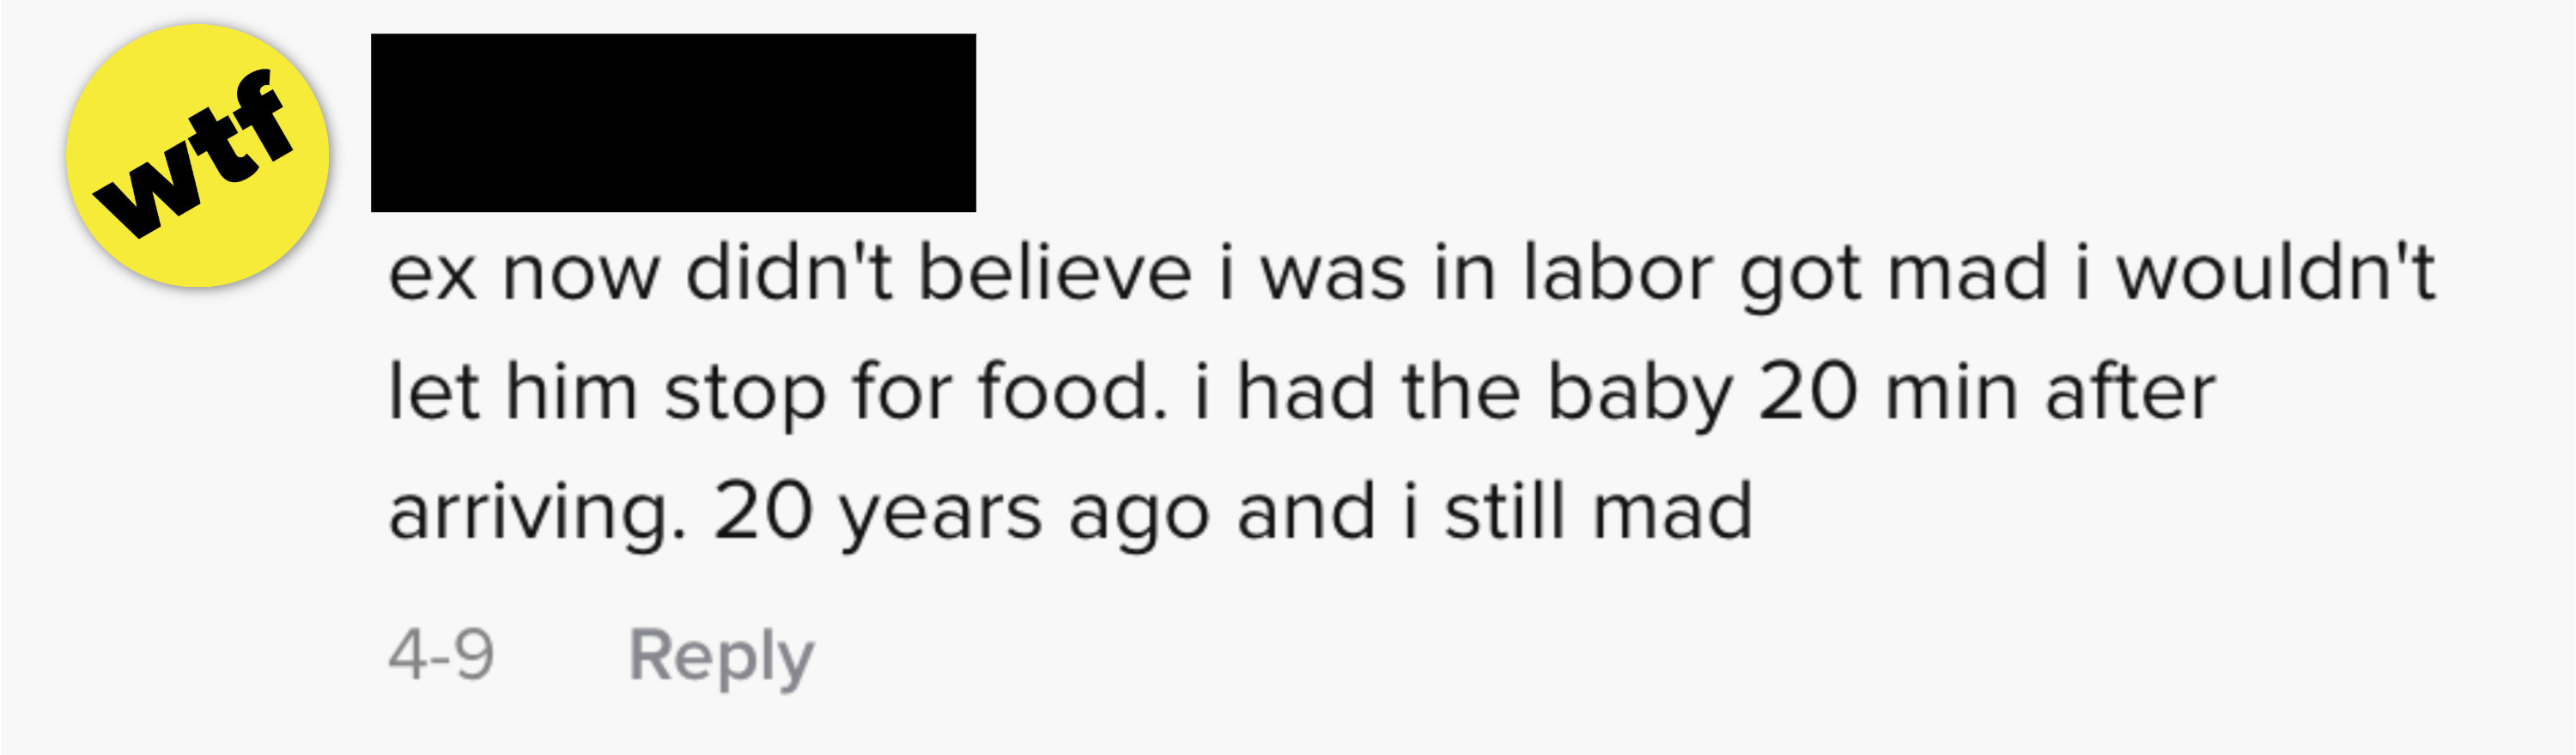 &quot;My now-ex didn&#x27;t believe I was in labor and got mad i wouldn&#x27;t let him stop for food. i had the baby 20 minutes after arriving. 20 year later I&#x27;m still mad&quot;